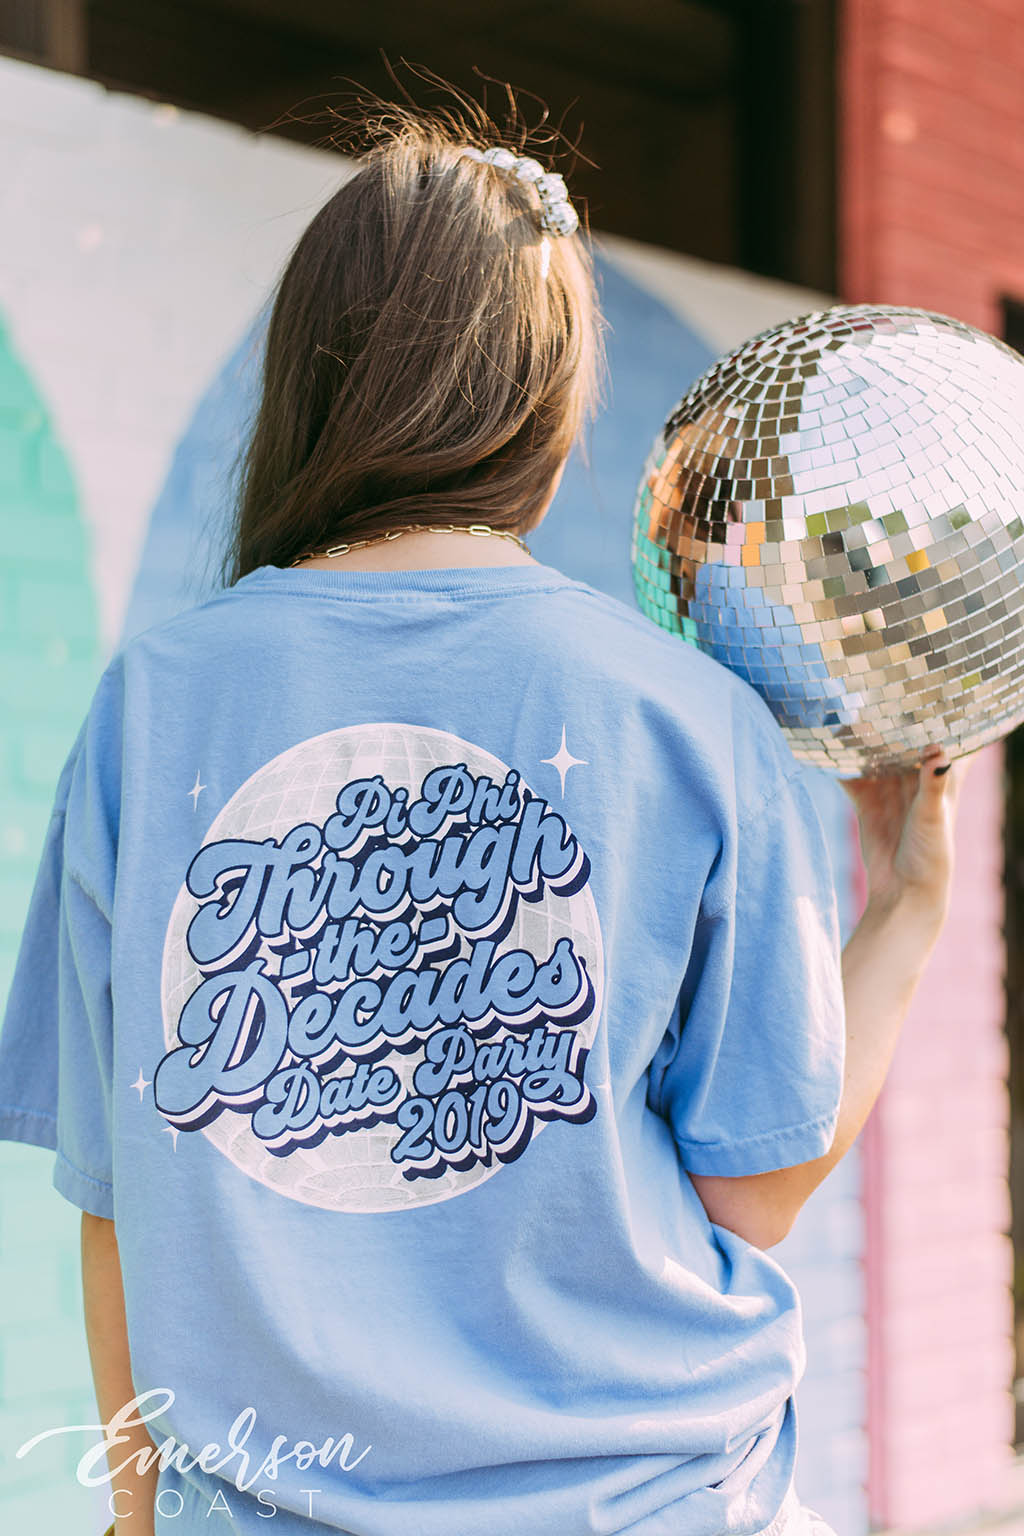 Pi Phi Through The Decades Date Party Pocket Tee